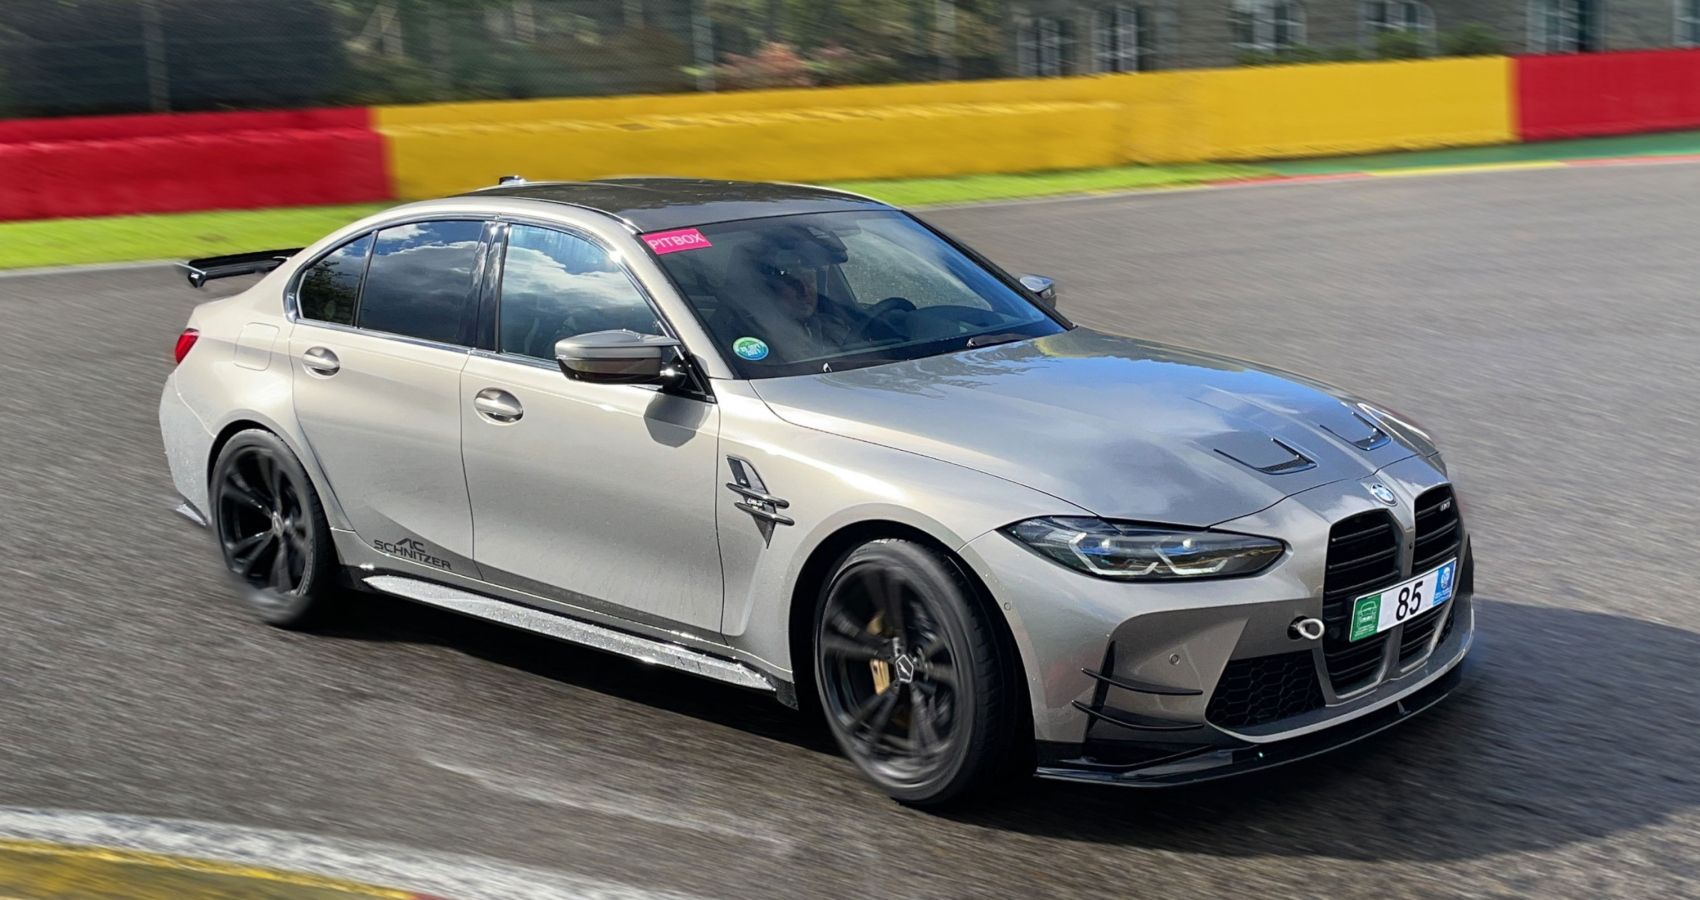 AC Schnitzer's Tuned BMW M3 Is More Than Just Power And Aero Upgrades